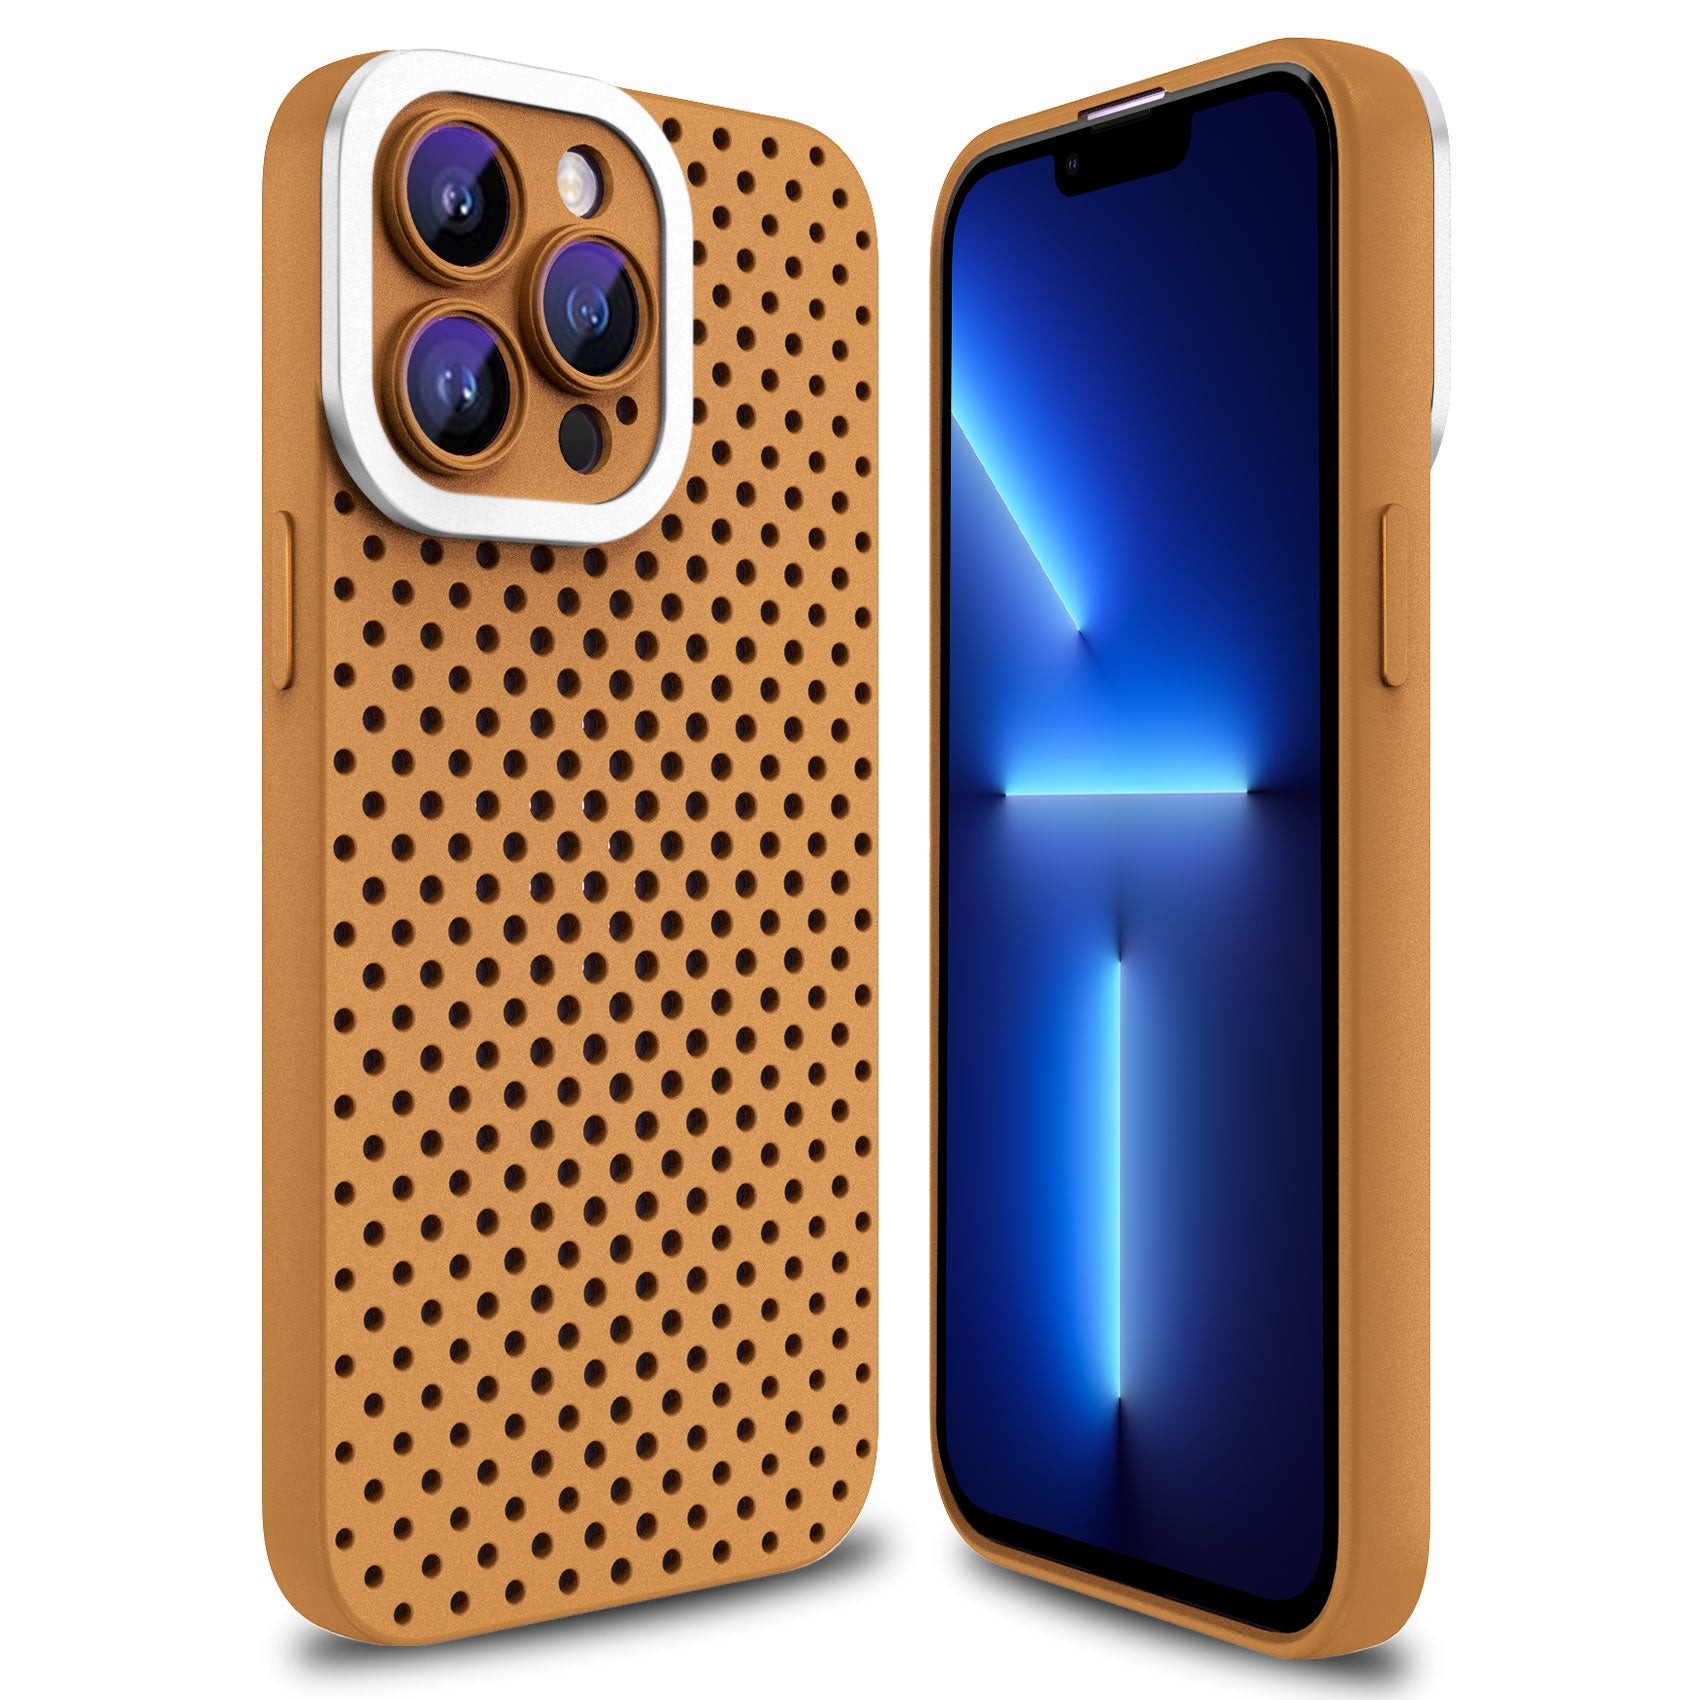 Uniqkart for iPhone 13 Pro Max 6.7 inch Skin-touch TPU Case Hollow Hole Heat Dissipation Phone Cover - Brown